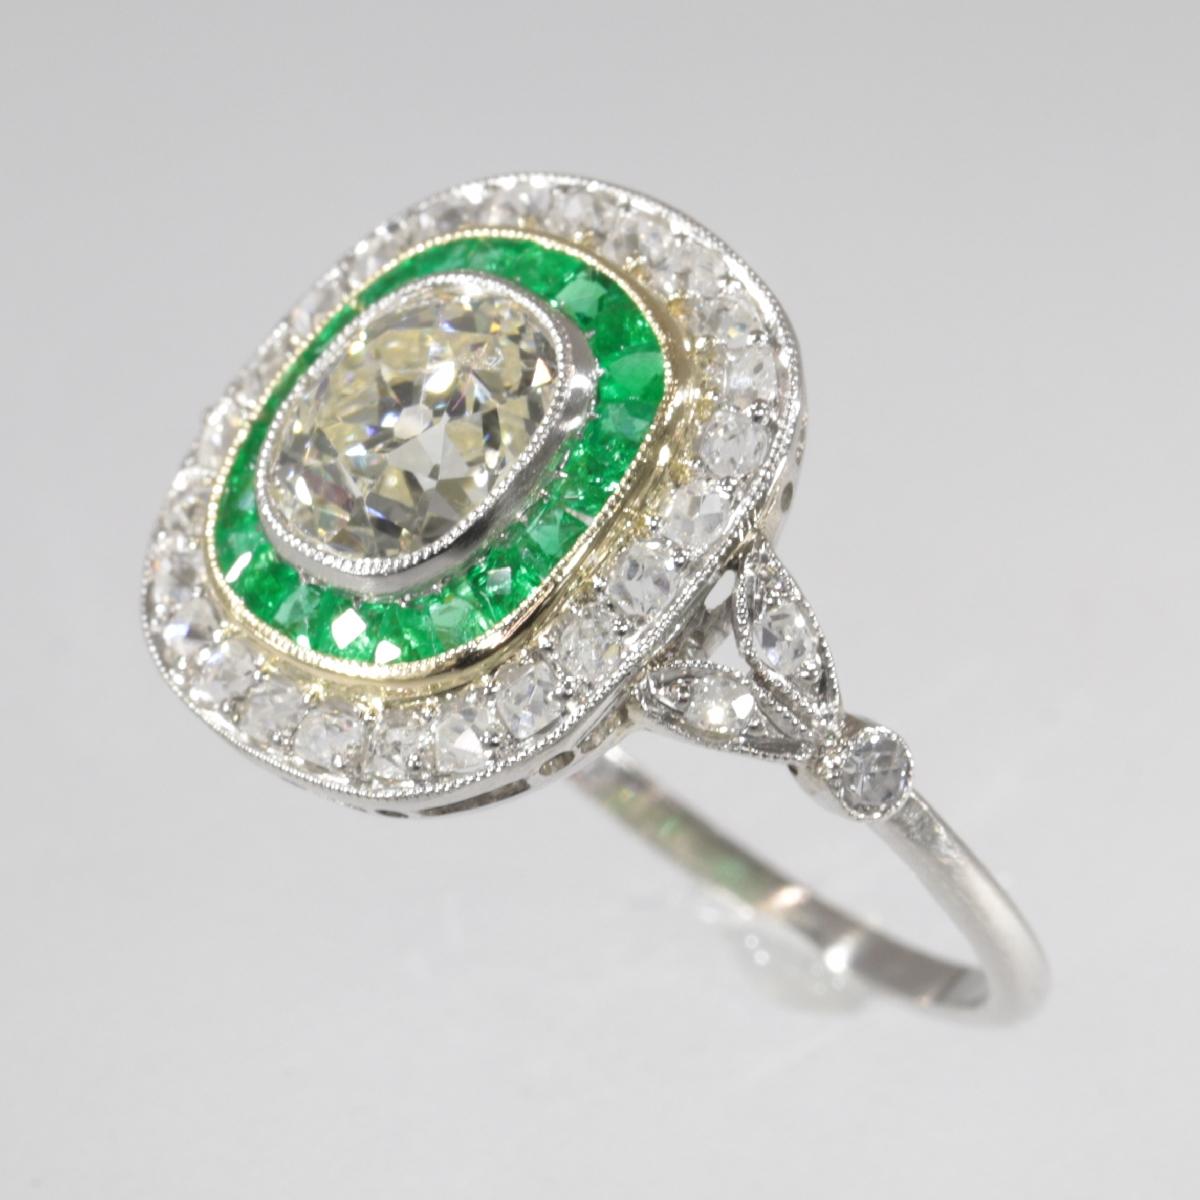 Stunning Vintage Art Deco Style Large Diamond and Emerald Engagement Ring, 1930s In Excellent Condition For Sale In Antwerp, BE